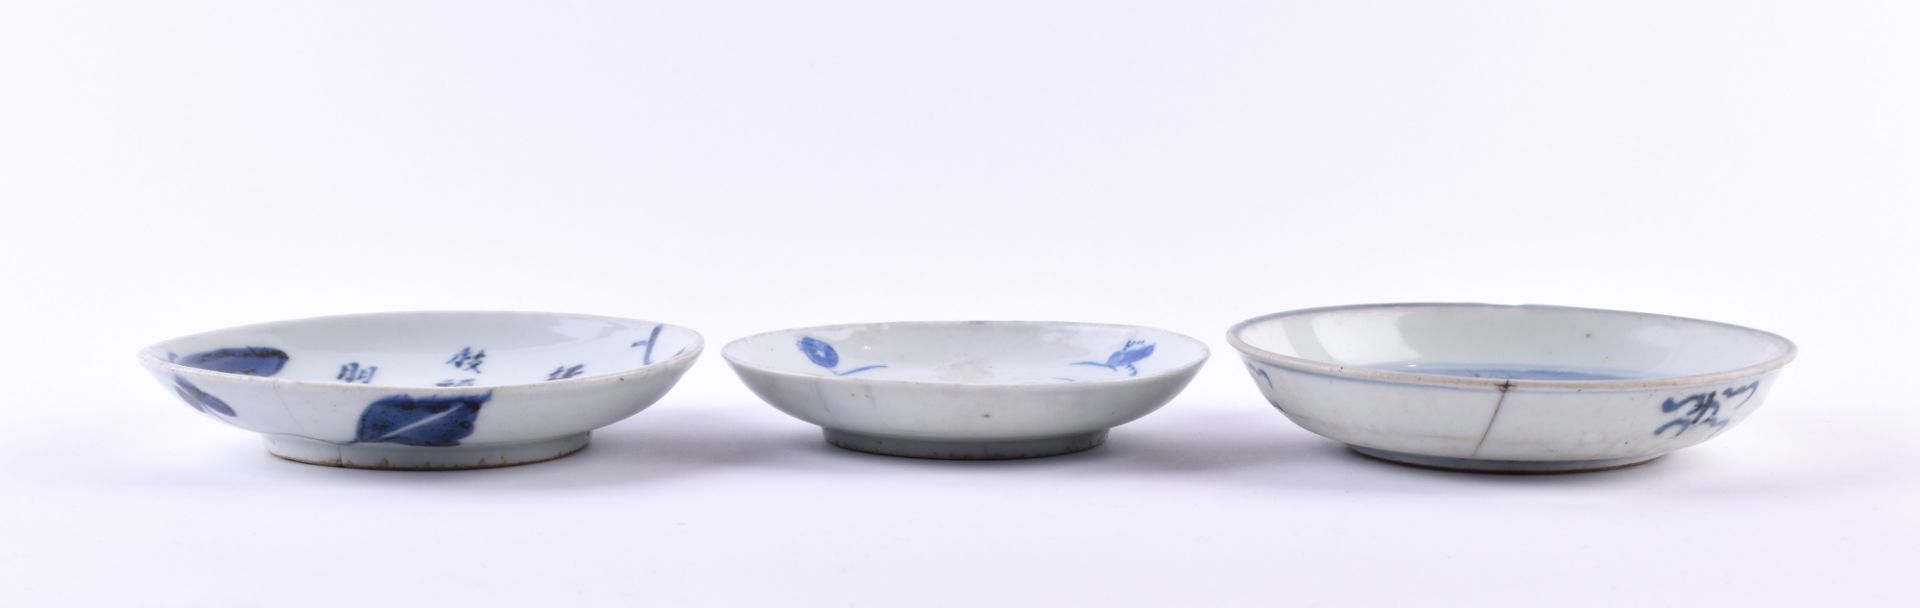  A group of Asian porcelain China Qing dynasty - Image 3 of 10